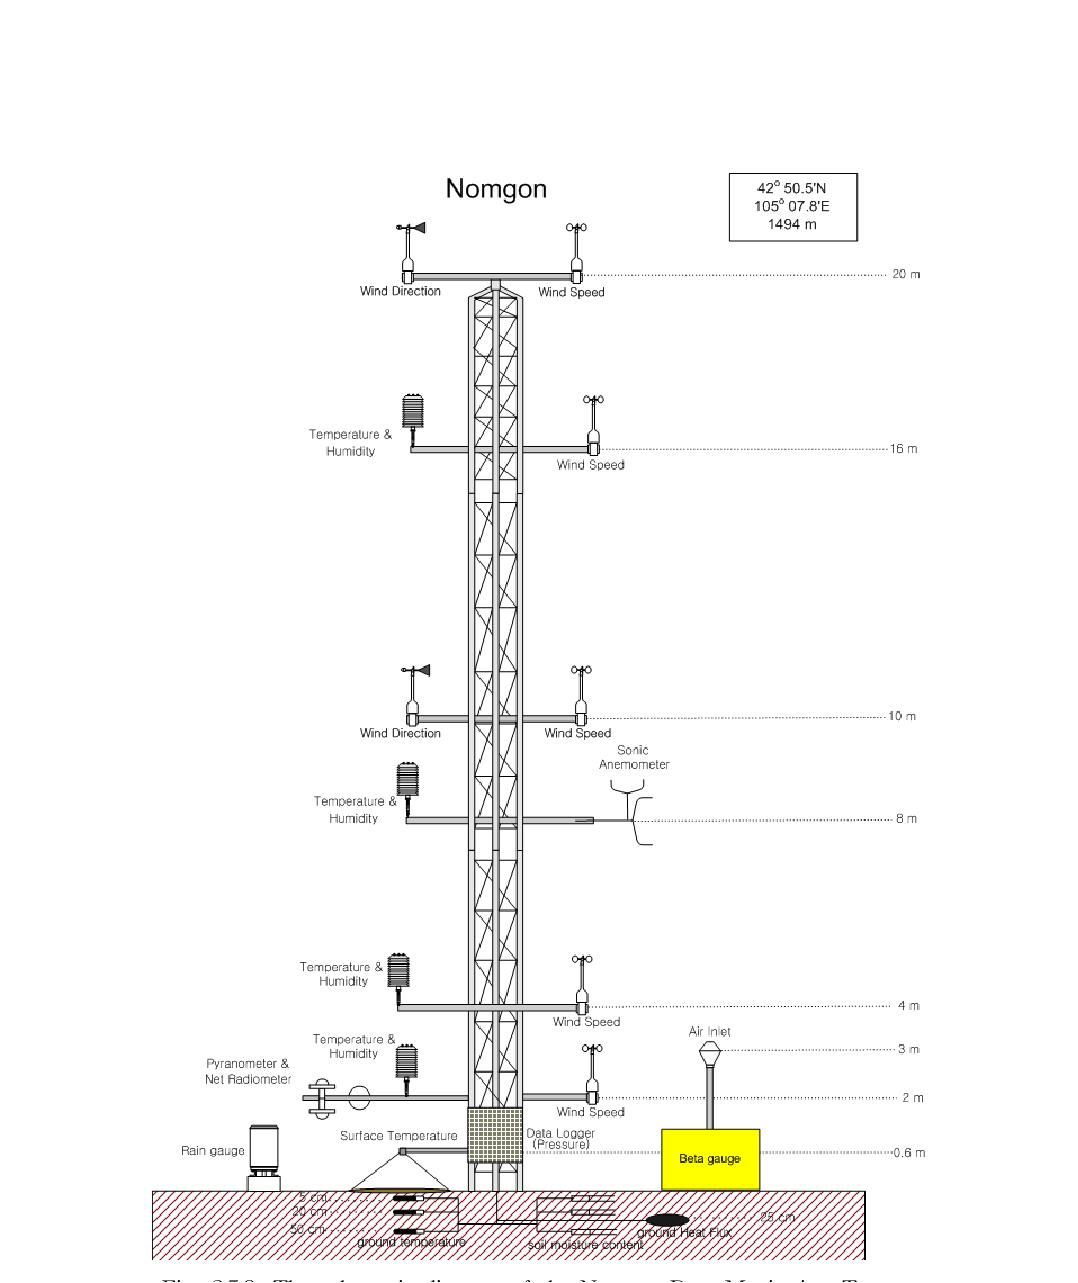 The schematic diagram of the Nomgon Dust Monitoring Tower.